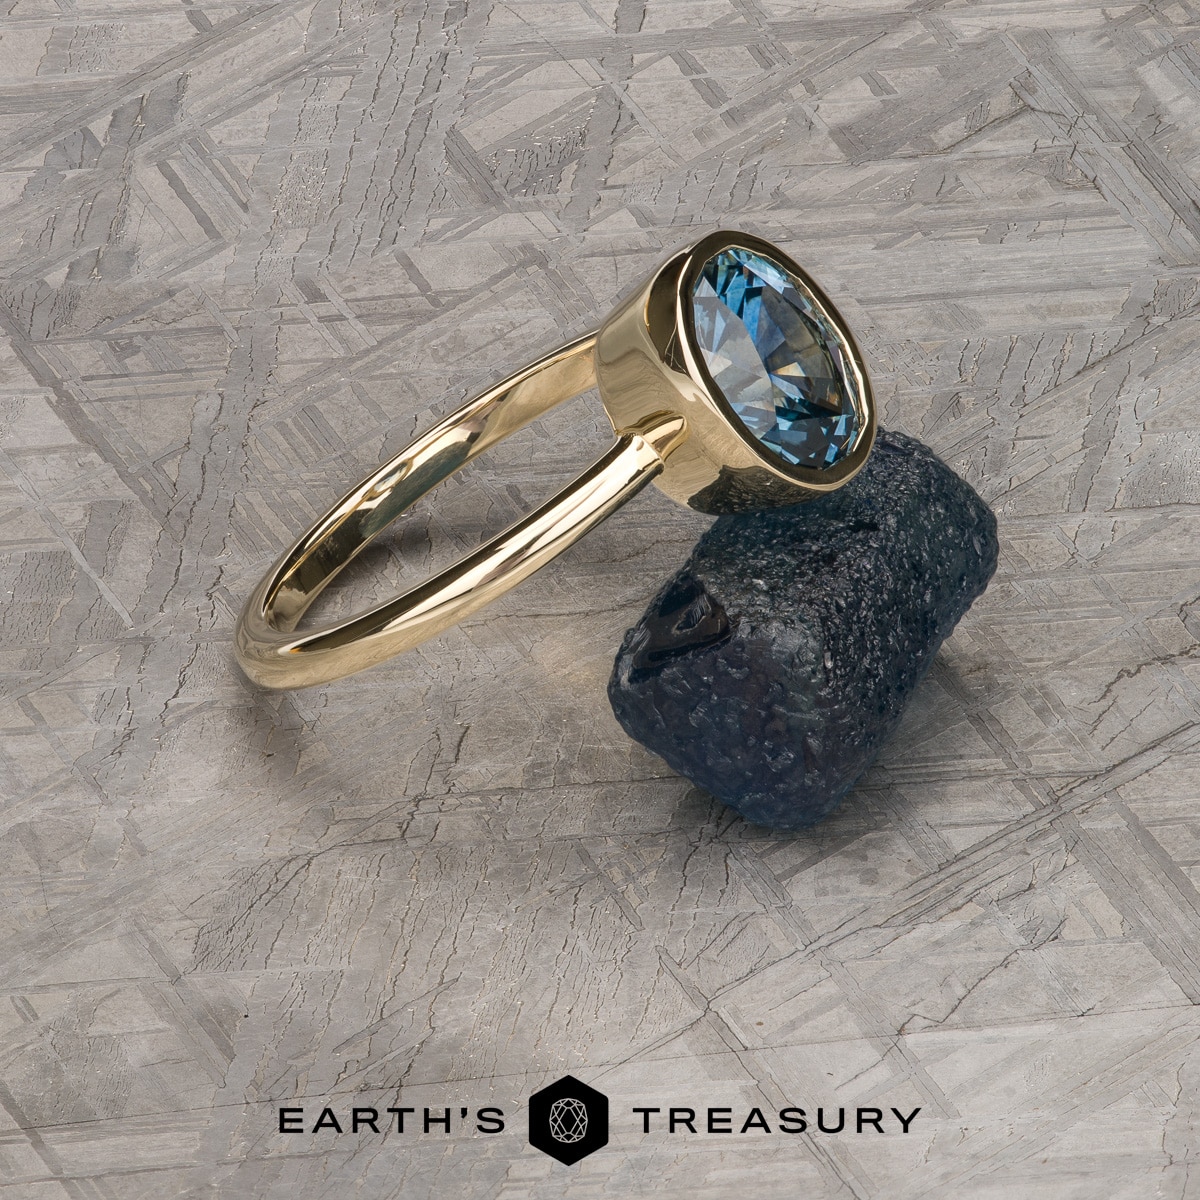 The "Deirdre" in 14k yellow gold with 2.01-carat Montana sapphire